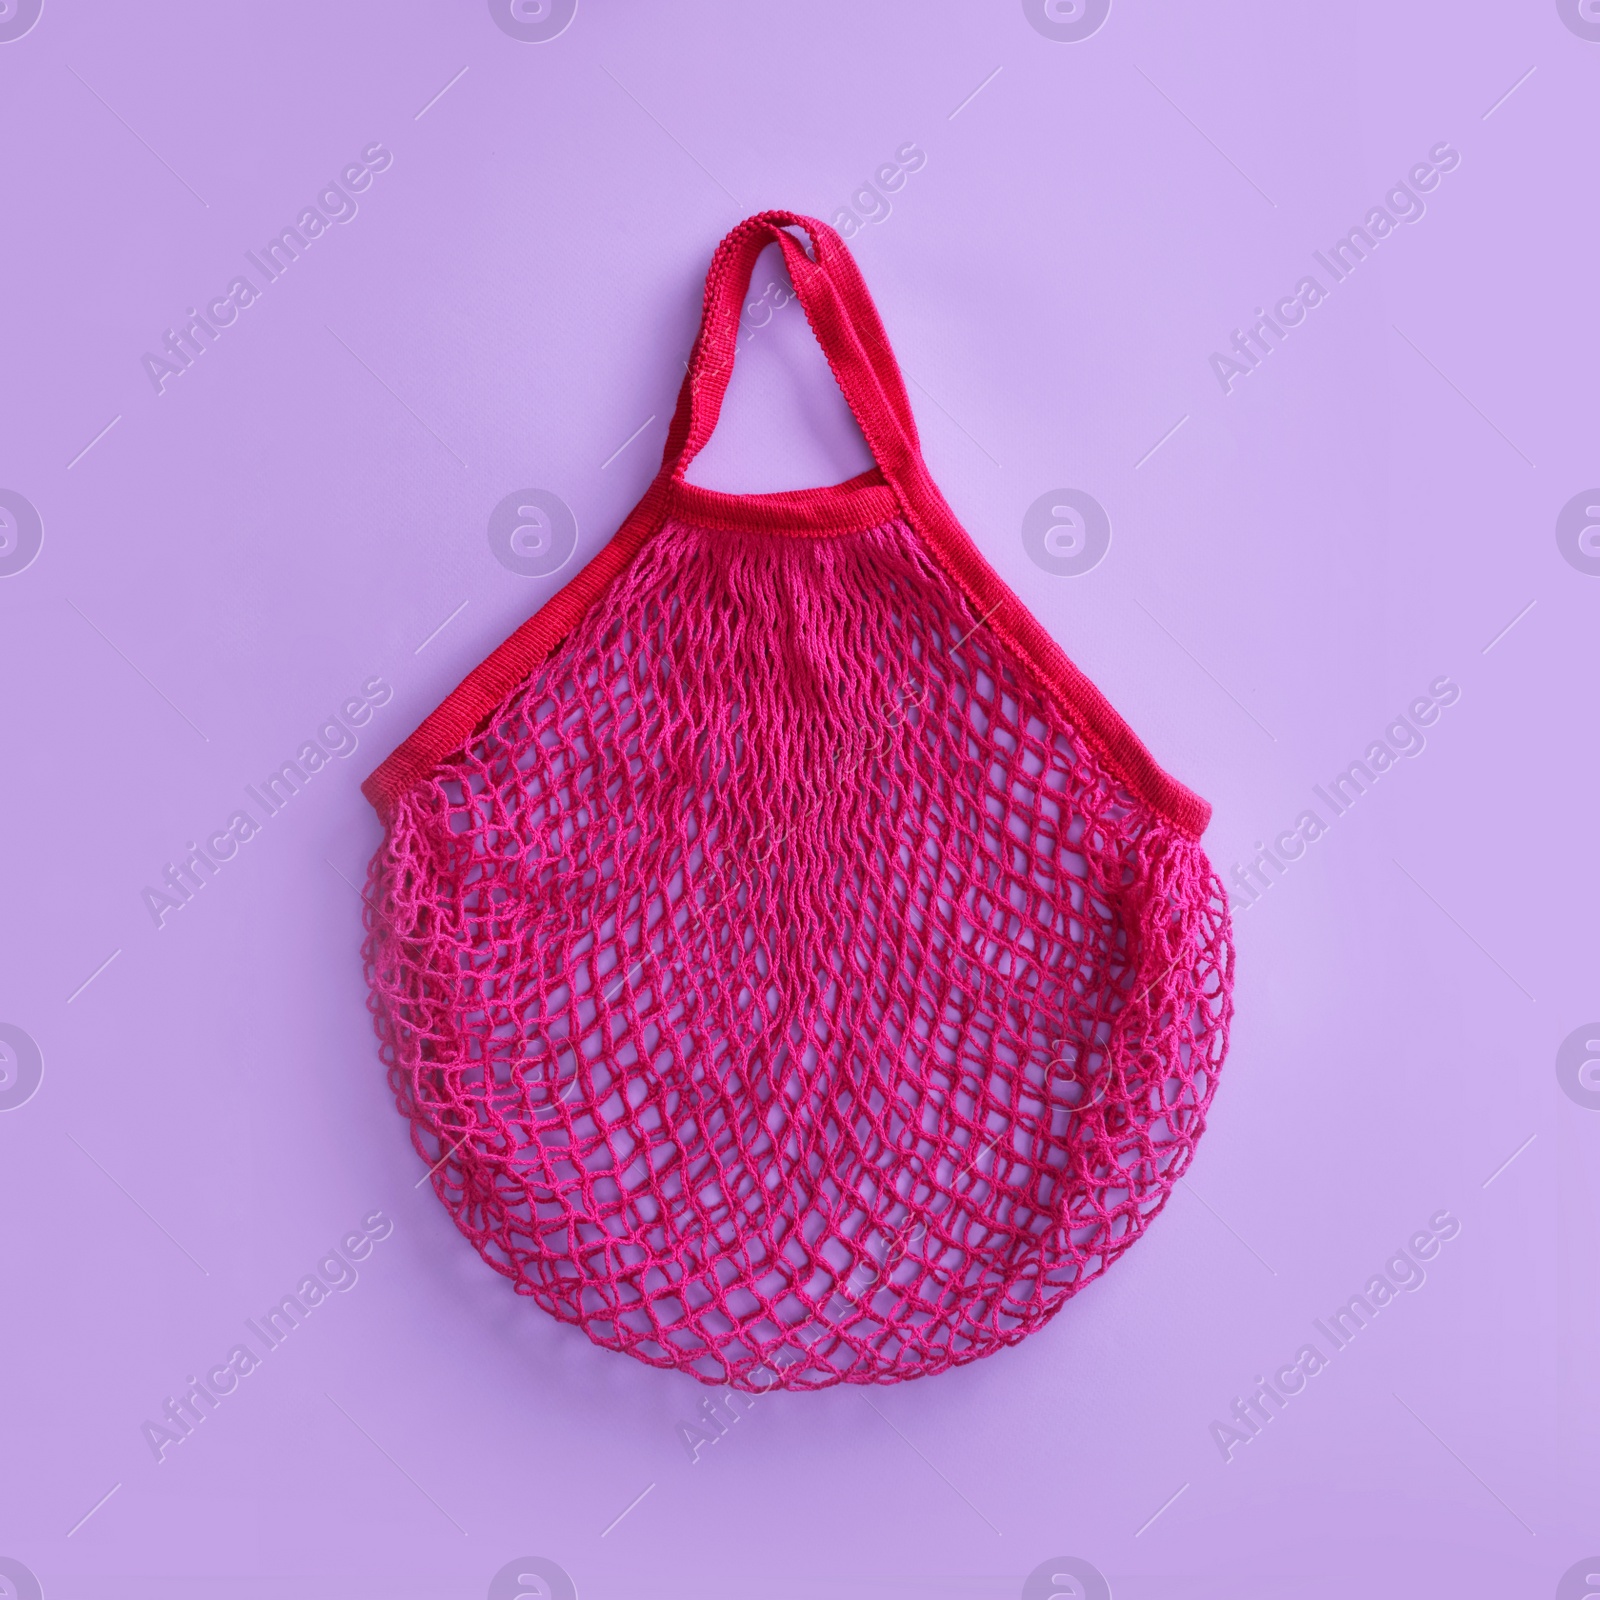 Photo of Empty net bag on lilac background, top view